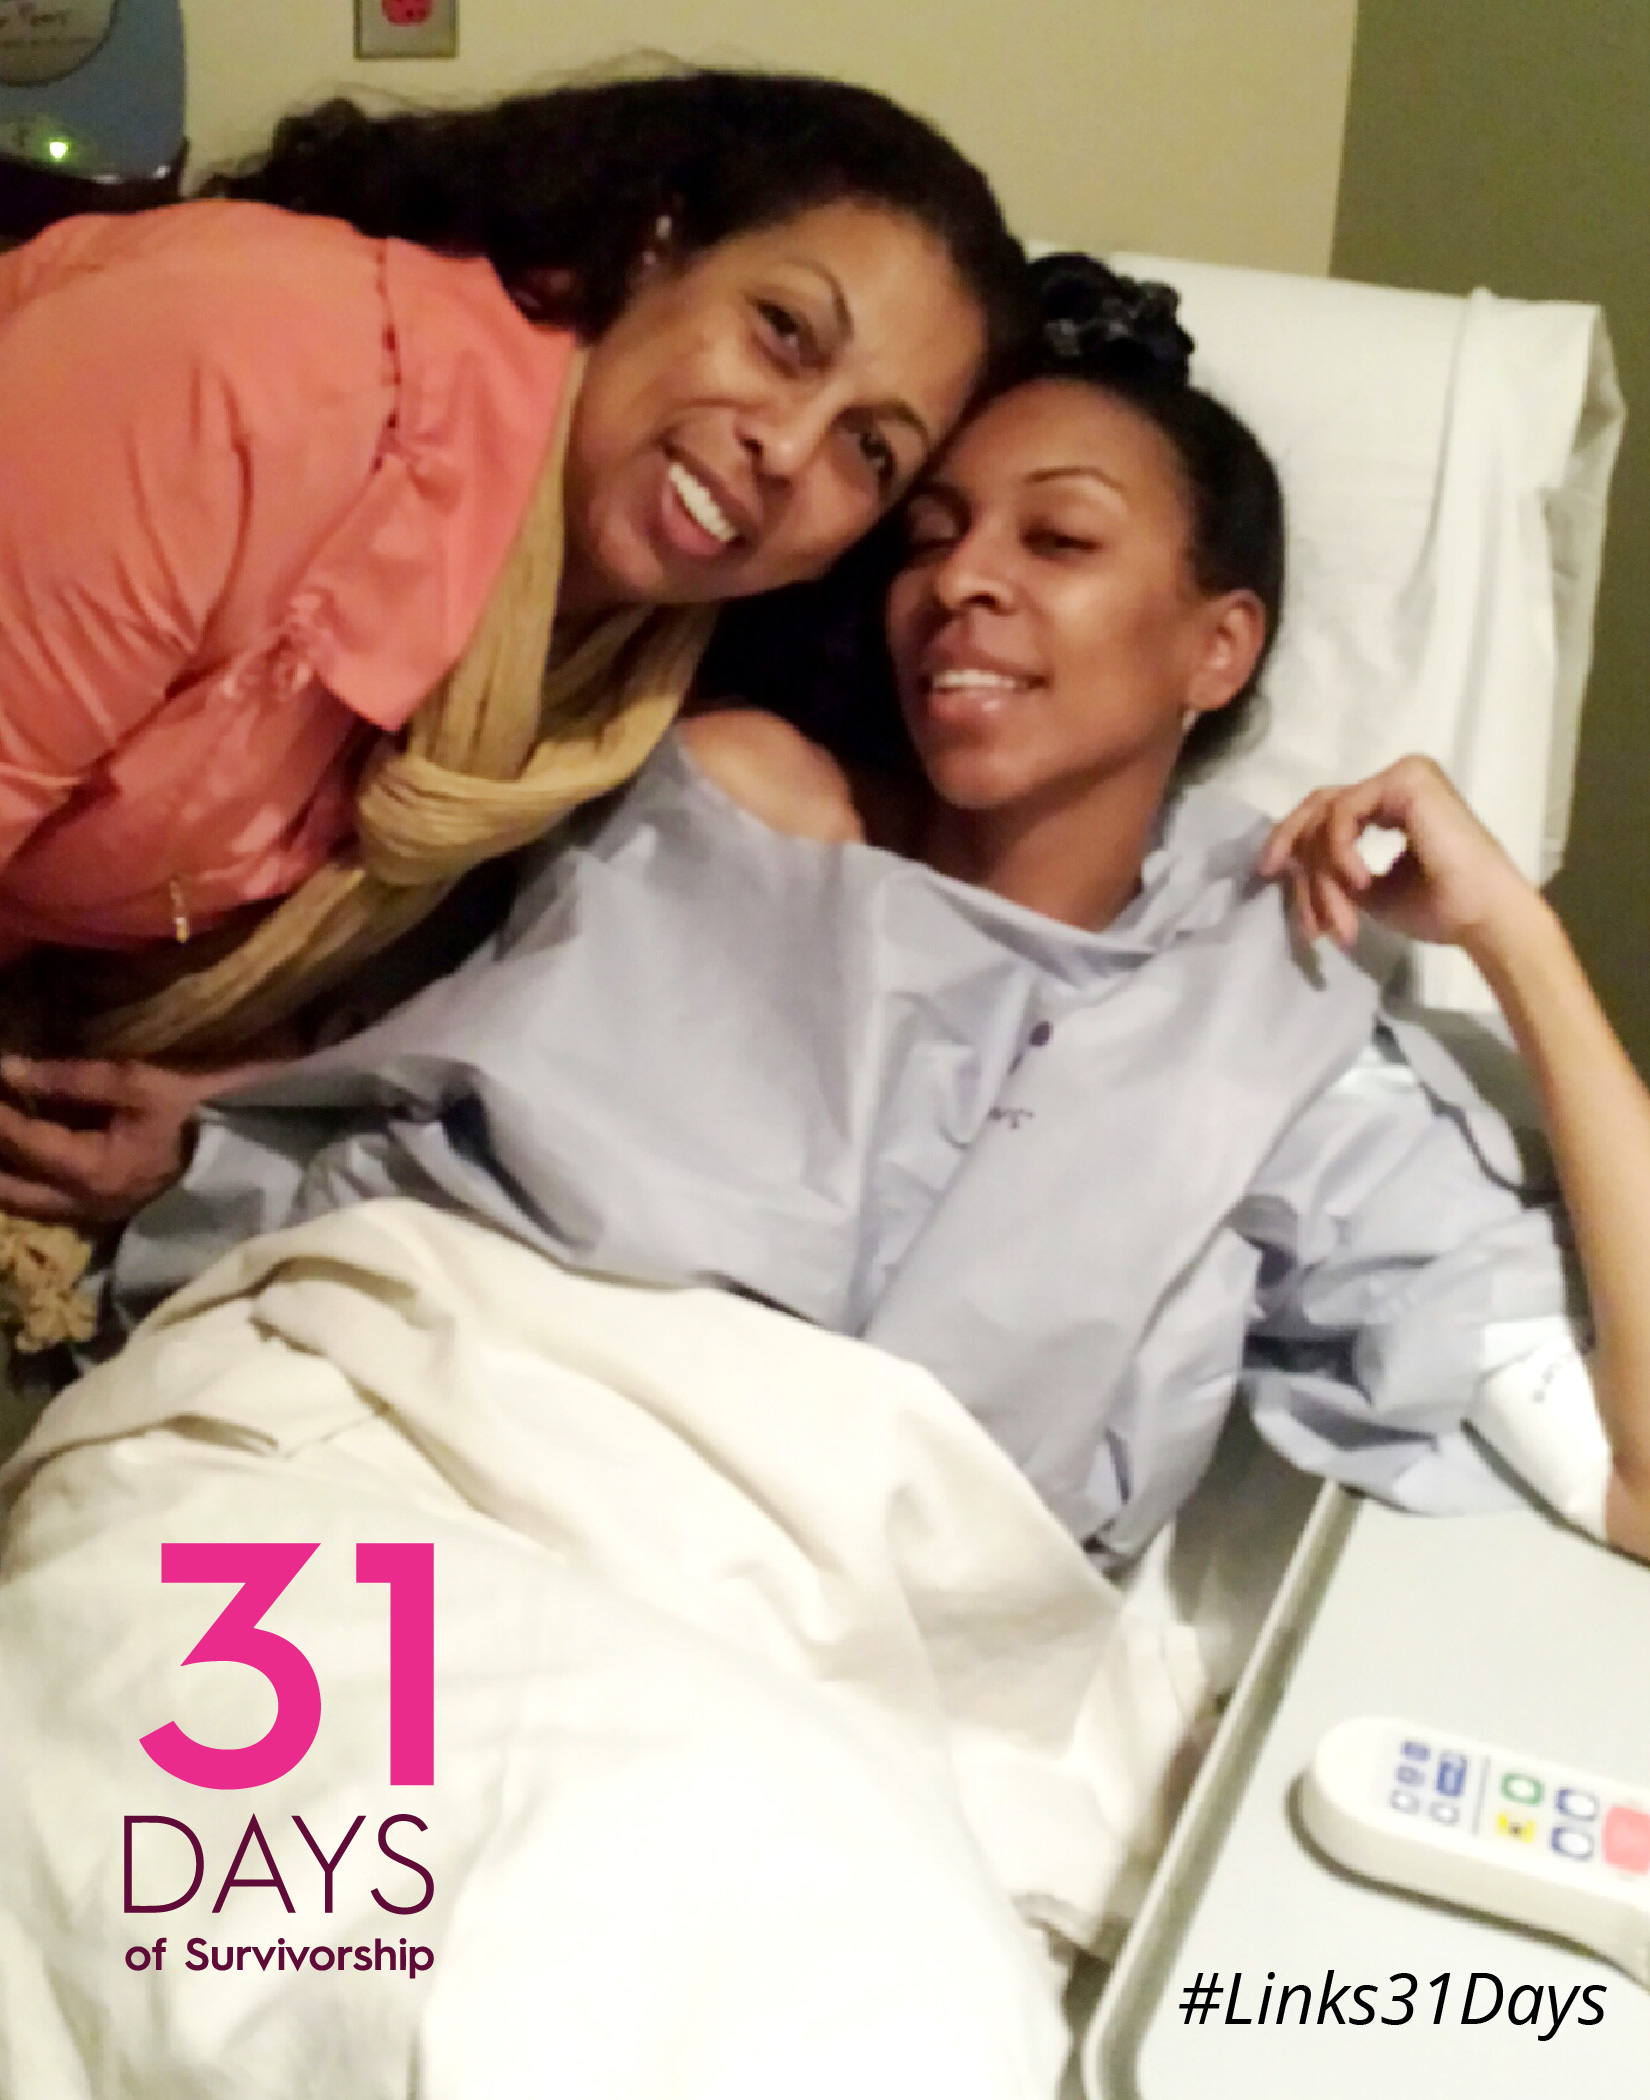 Jan Hickman with her daughter, Alane, before her surgery.